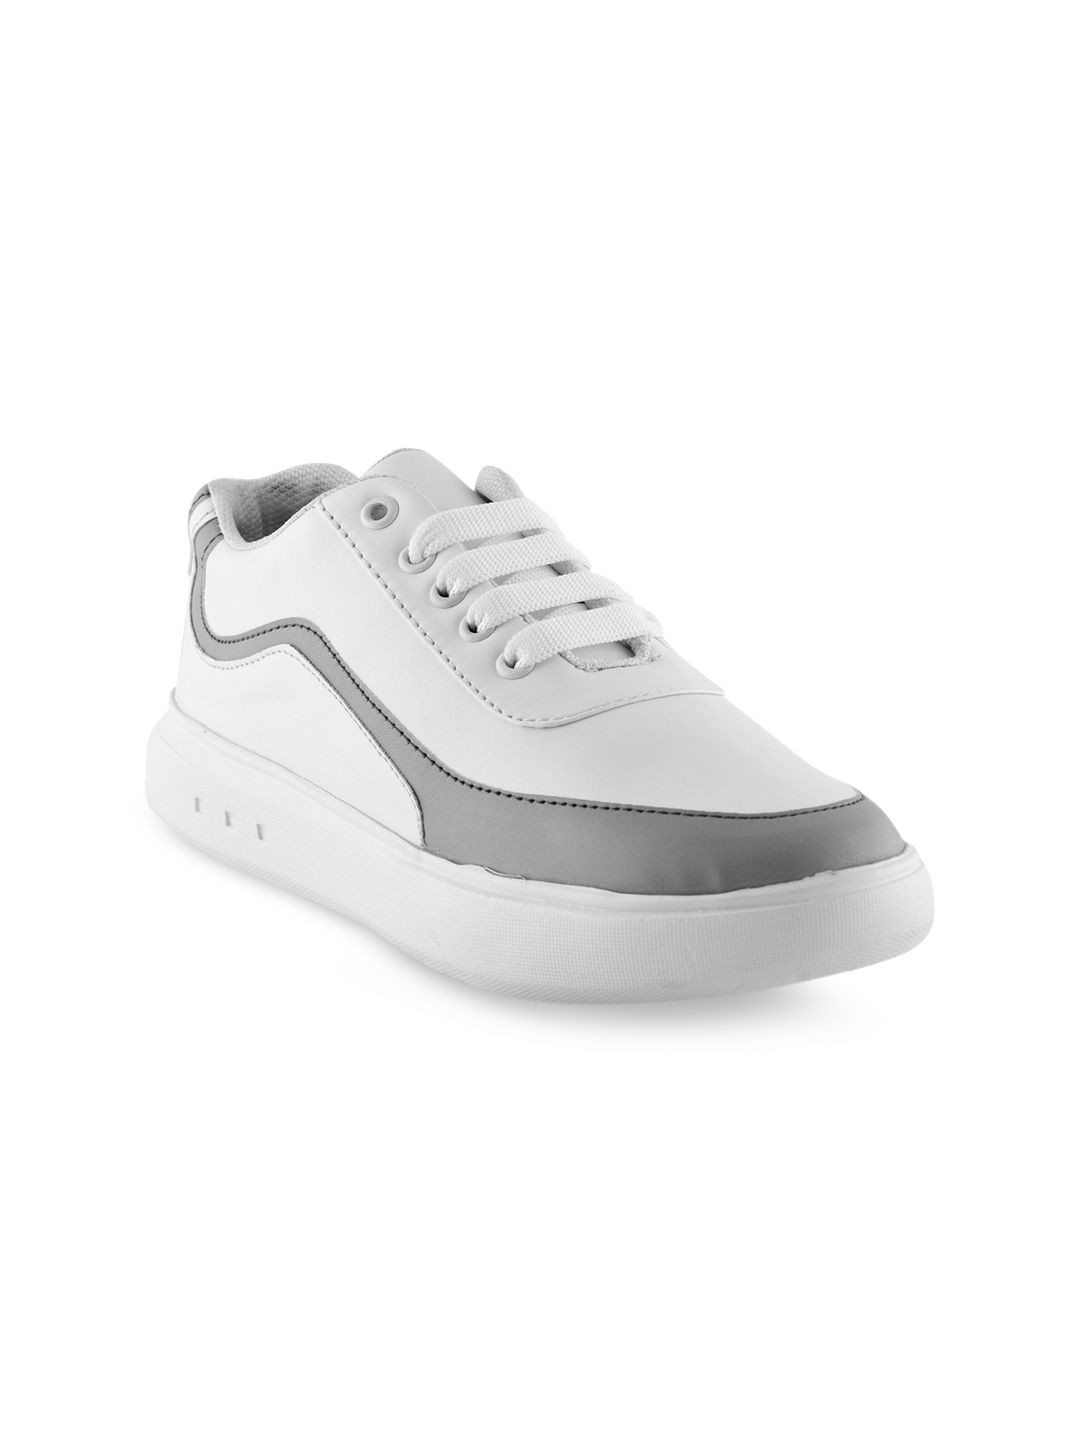 ZAPATOZ Women White Lightweight Sneakers Price in India